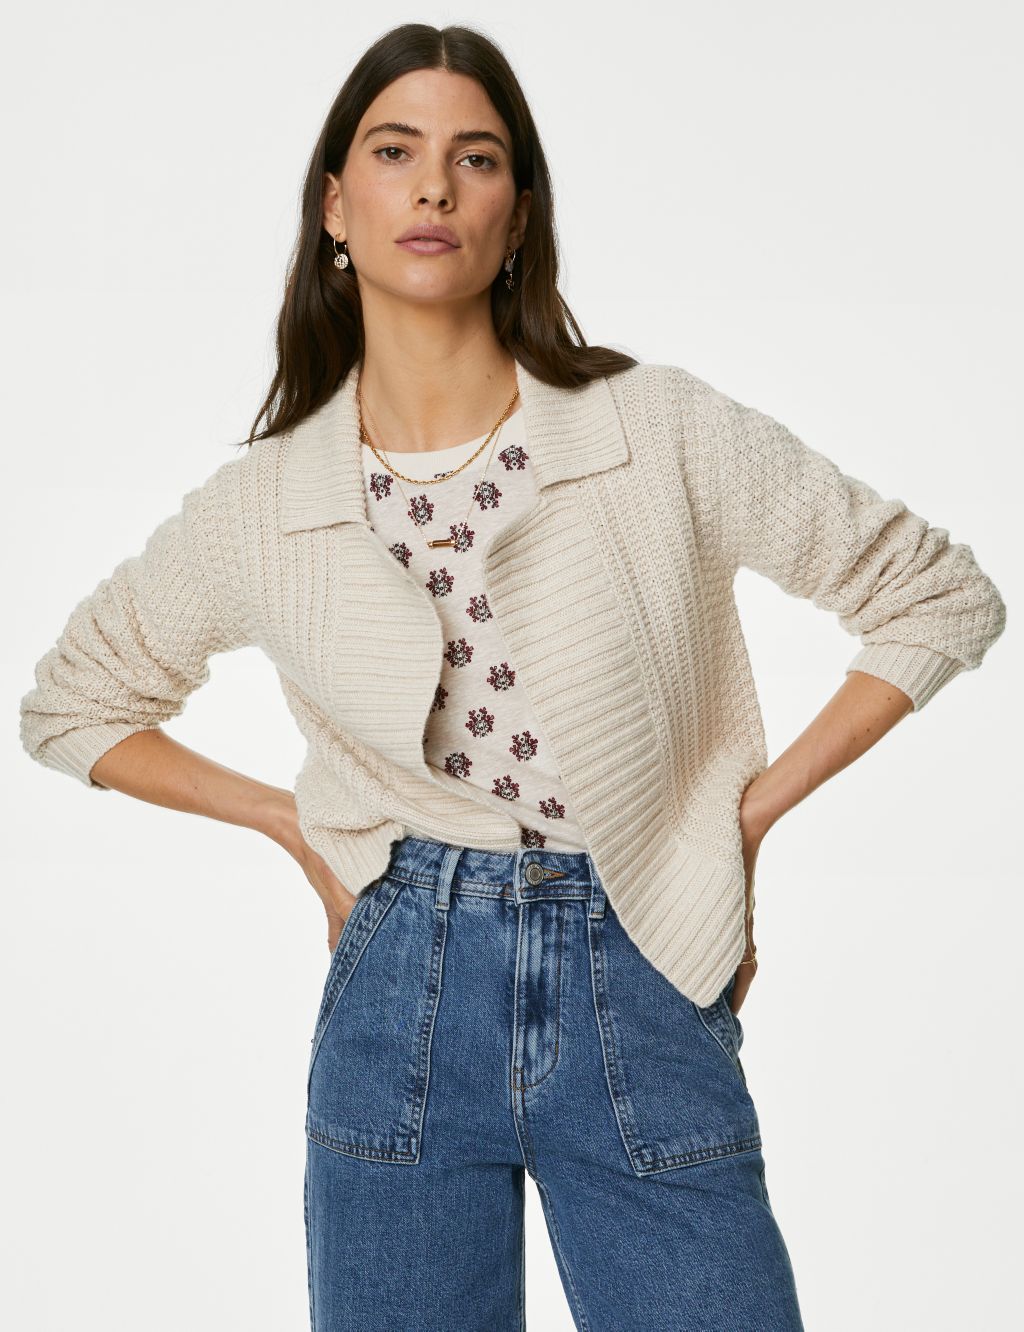 Knitted Collared Cardigan With Wool image 3